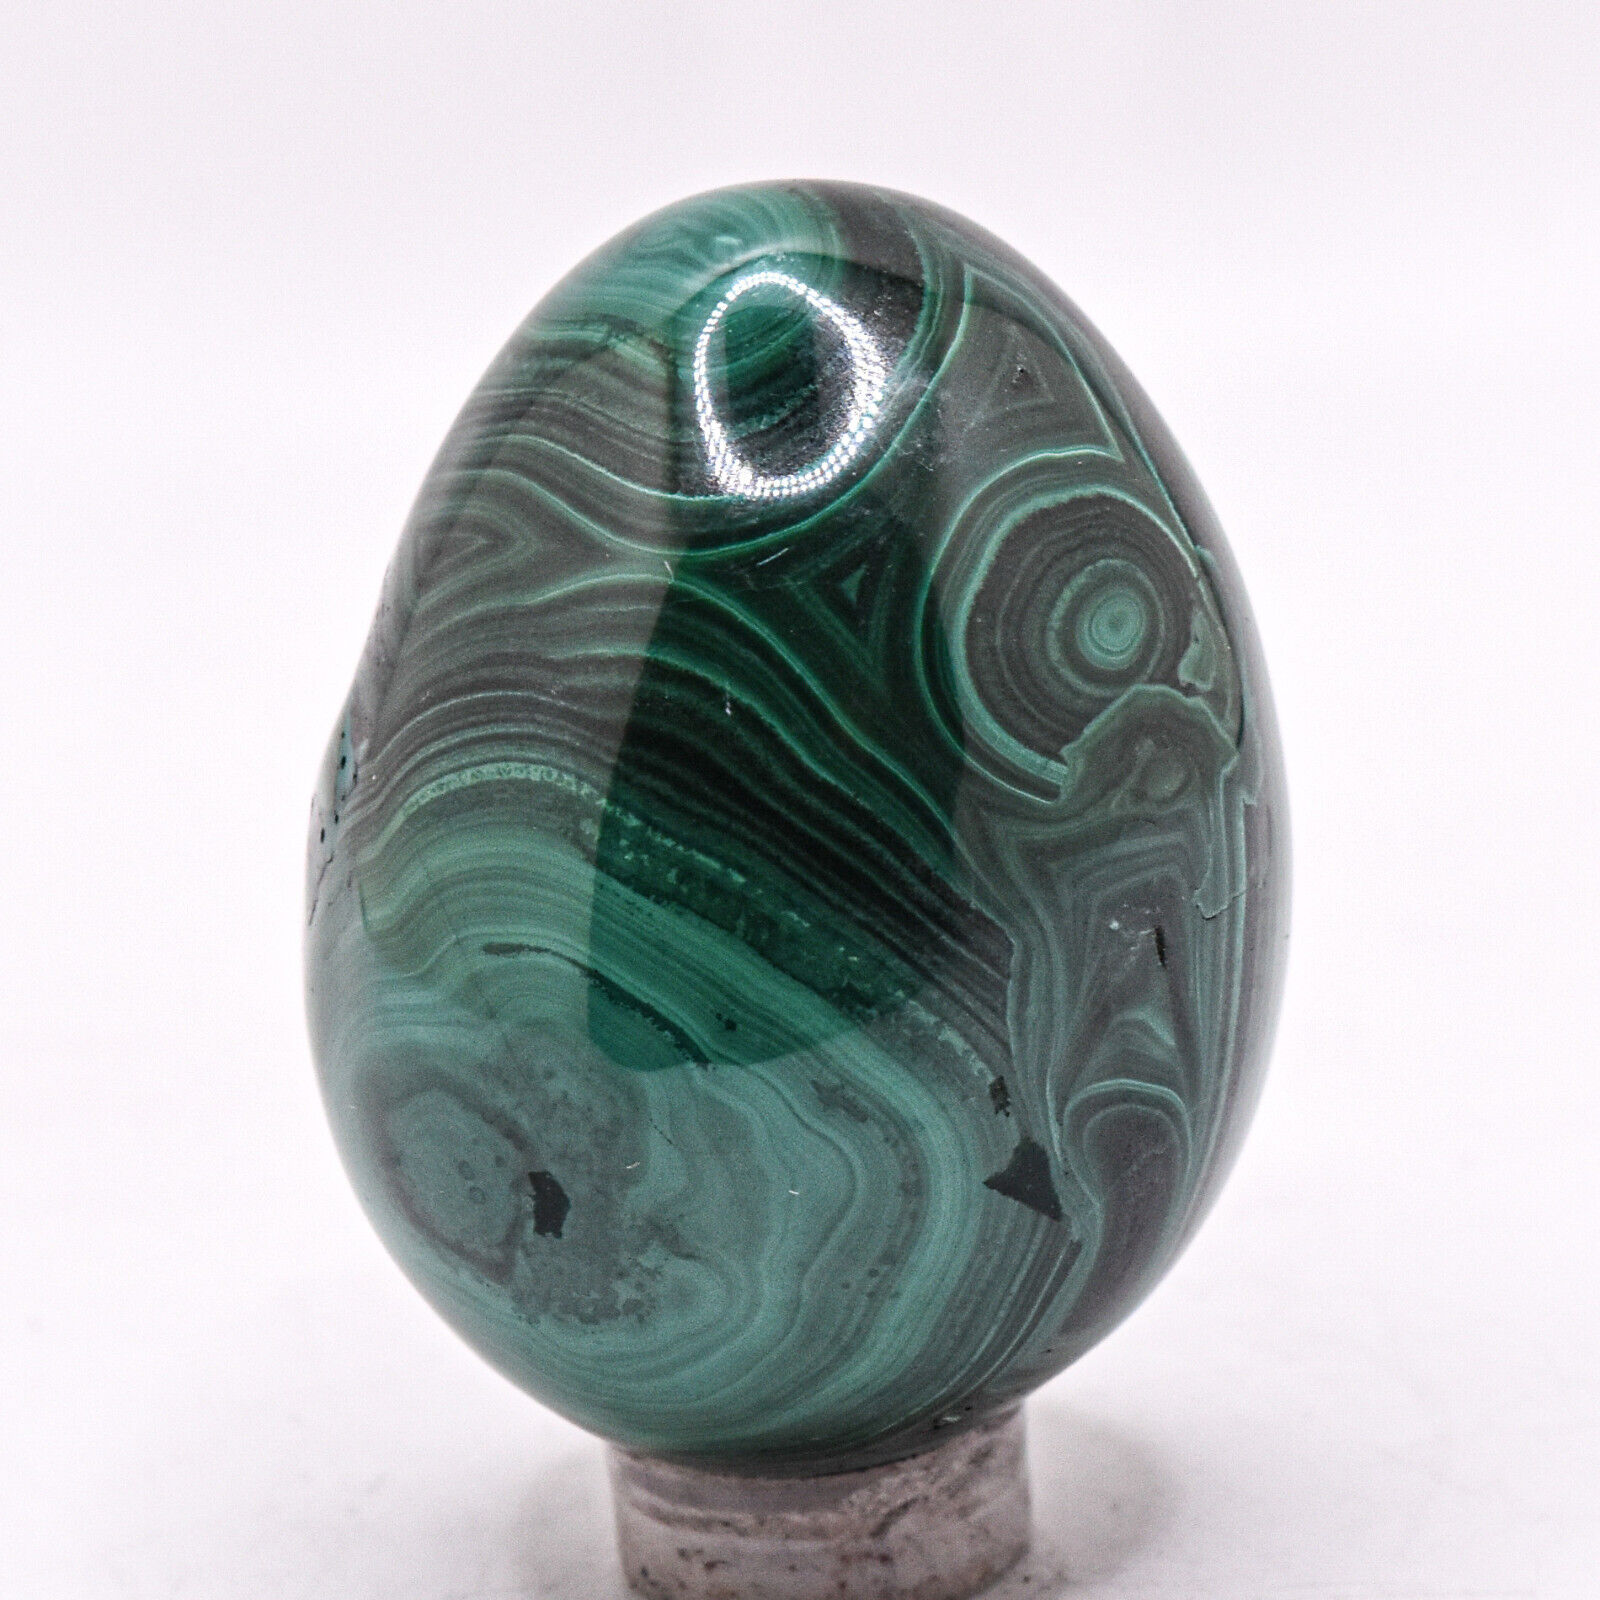 48mm Green Malachite Egg Banded Natural Crystal Sparkling Mineral Stone - Congo